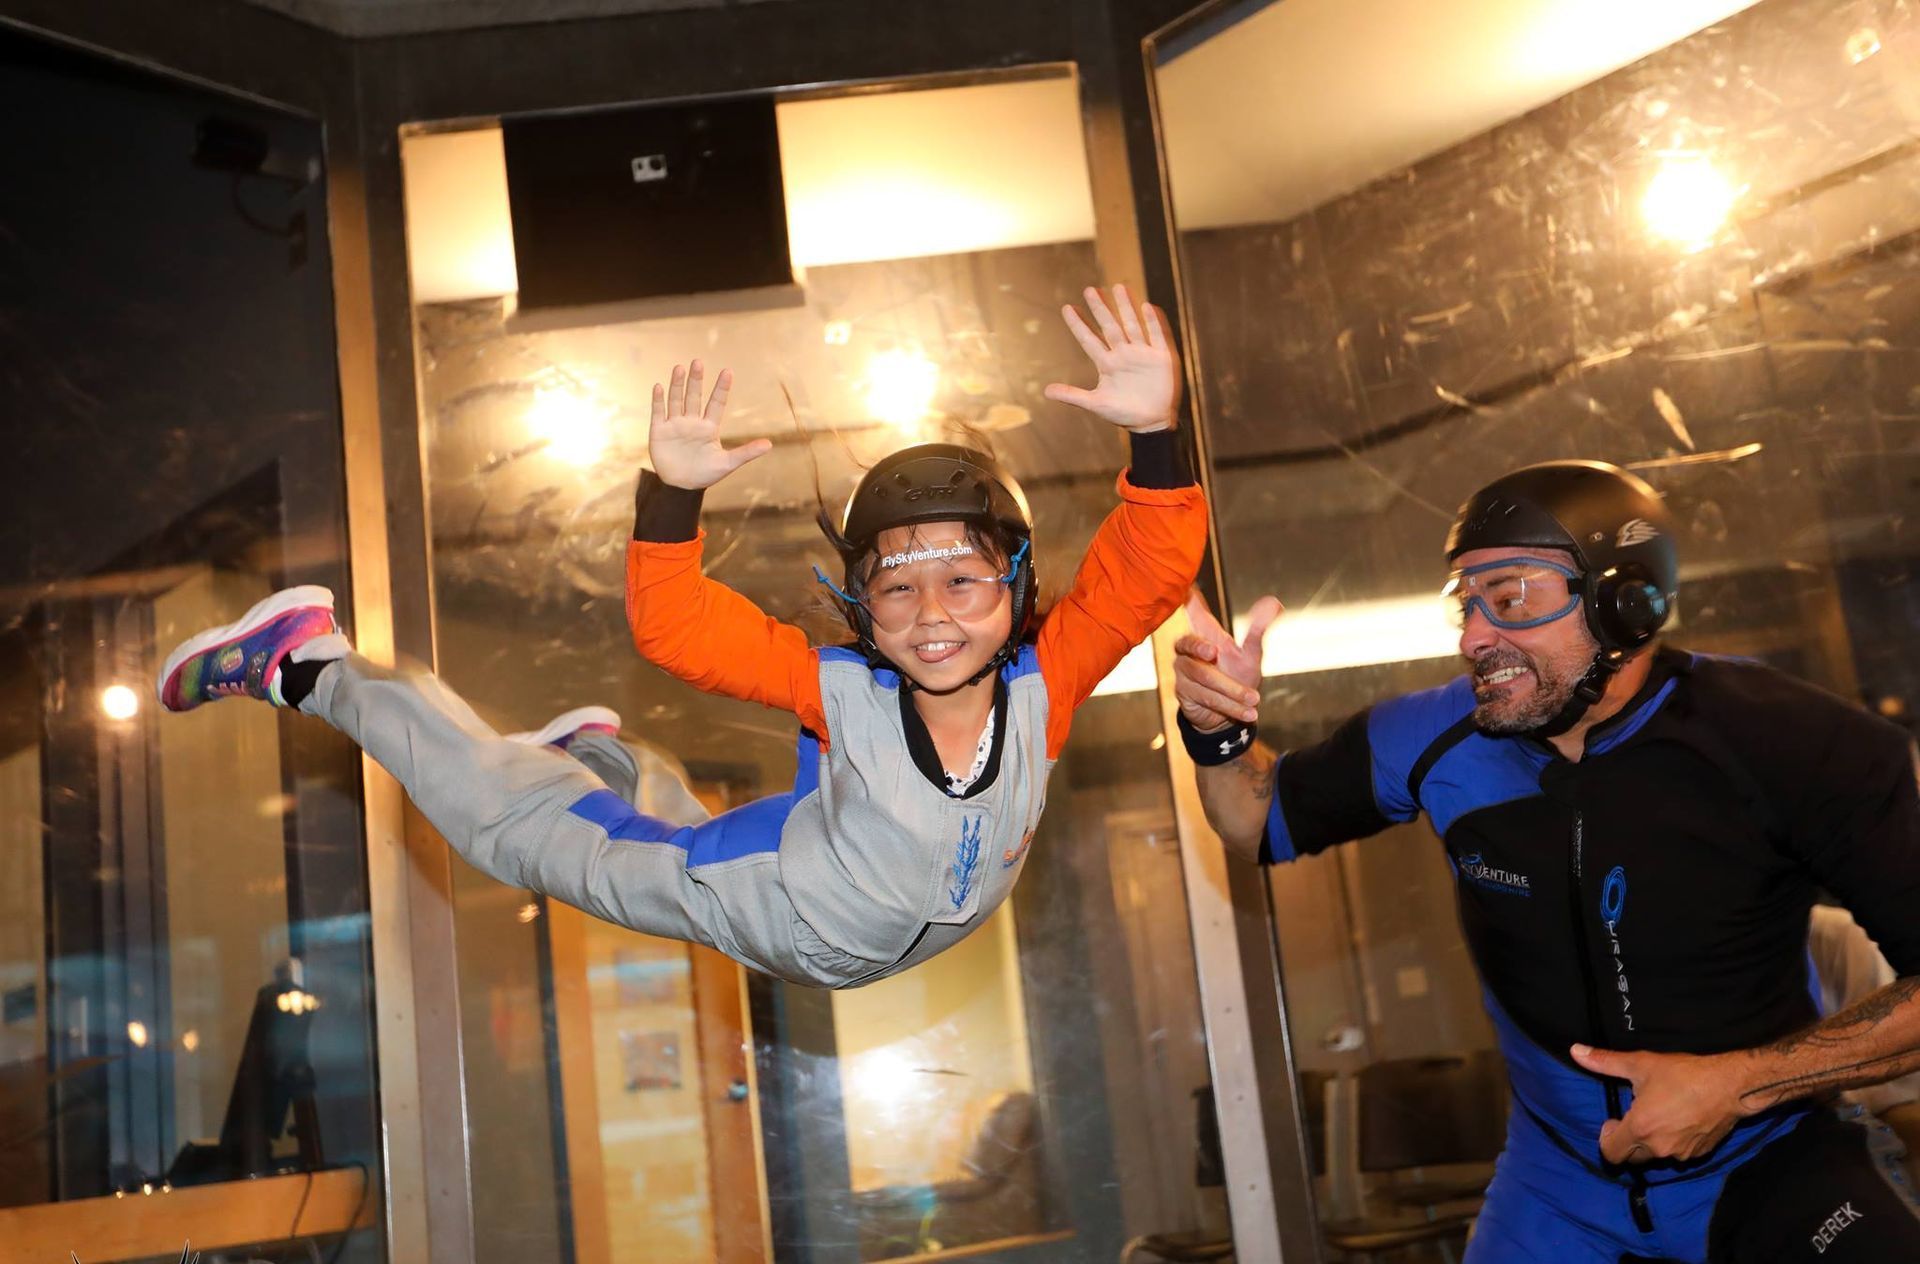 World’s First Skydiving and Indoor Surf Park, world record in Nashua, New Hampshire